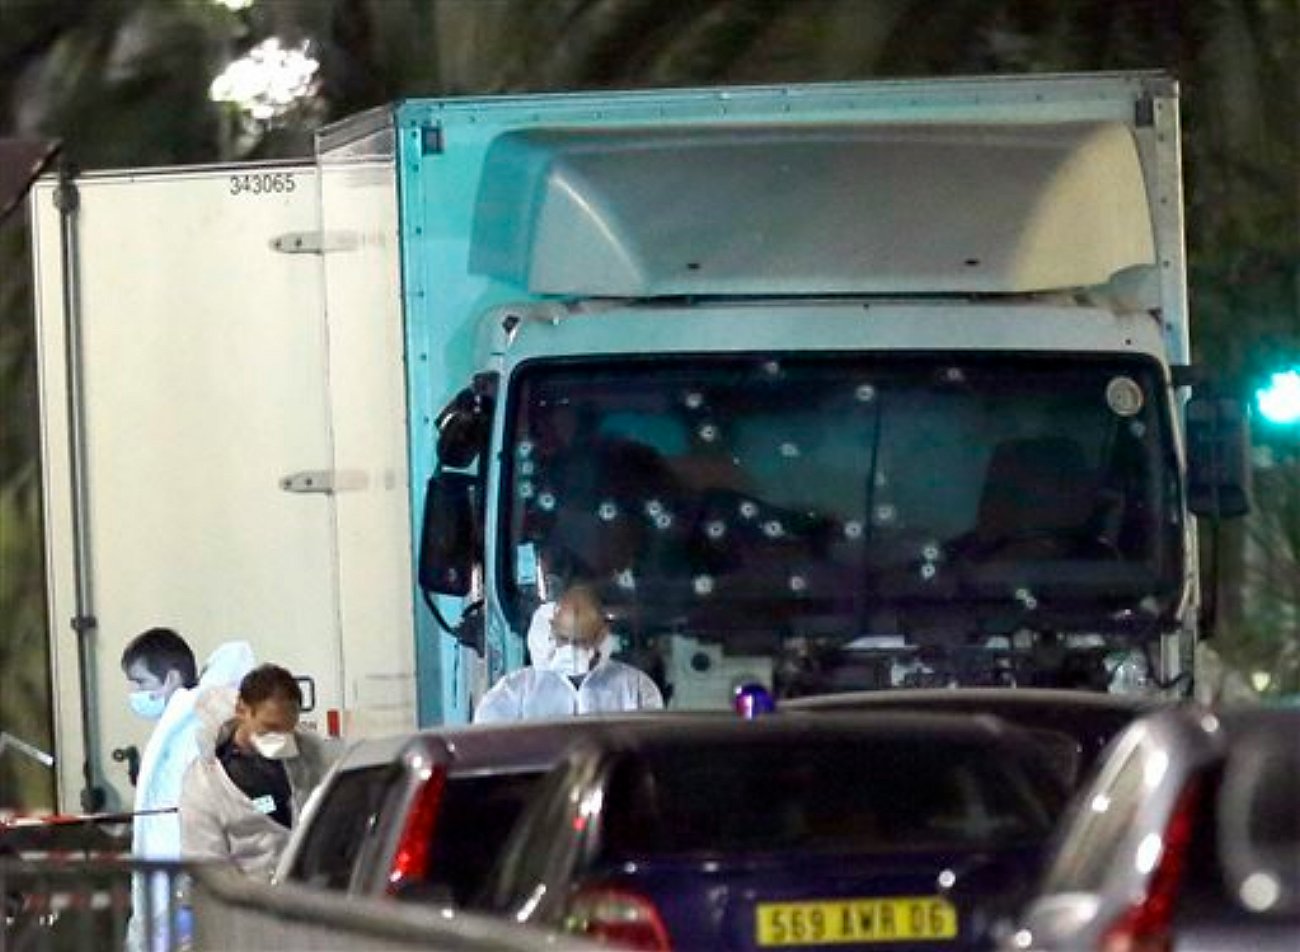 Forensic officers stands near a truck with its windscreen riddled with bullets, that plowed through a crowd of revelers who'd gathered to watch the fireworks in the French resort city of Nice, southern France, Friday, July 15, 2016. At least 80 people were killed before police killed the driver, authorities said, Nice France, July 15, 2016 | AP Photo by Claude Paris, St. George News